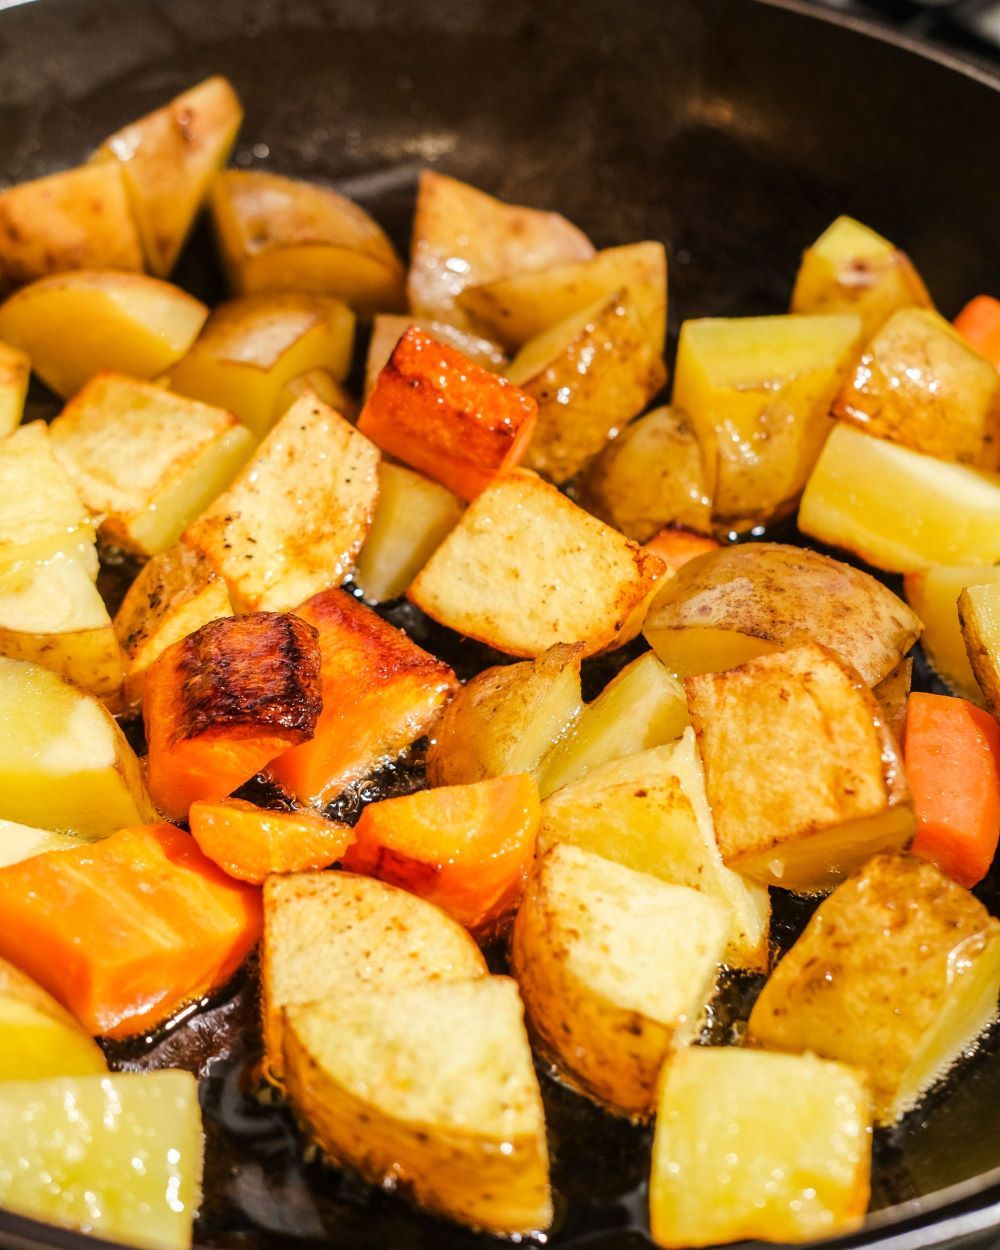 Frying carrots and potatoes